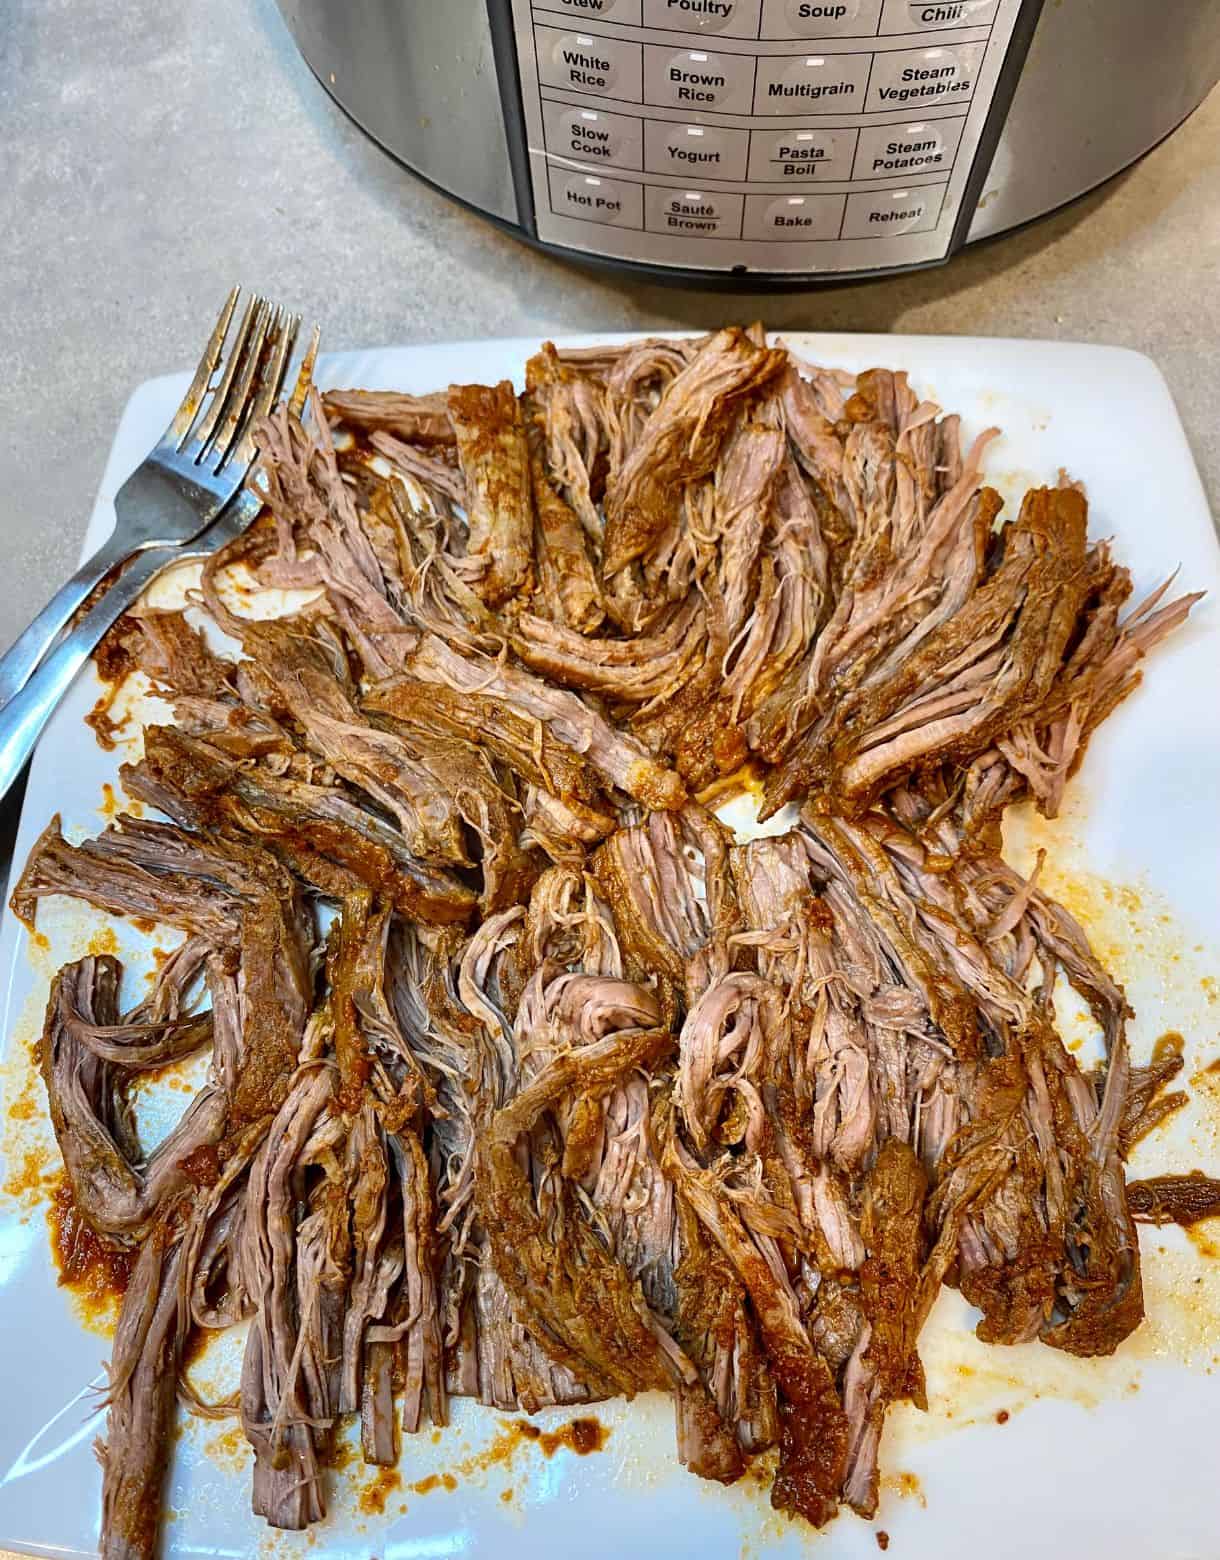 A plate with shredded beef and two forks for Pulled Beef Tacos.